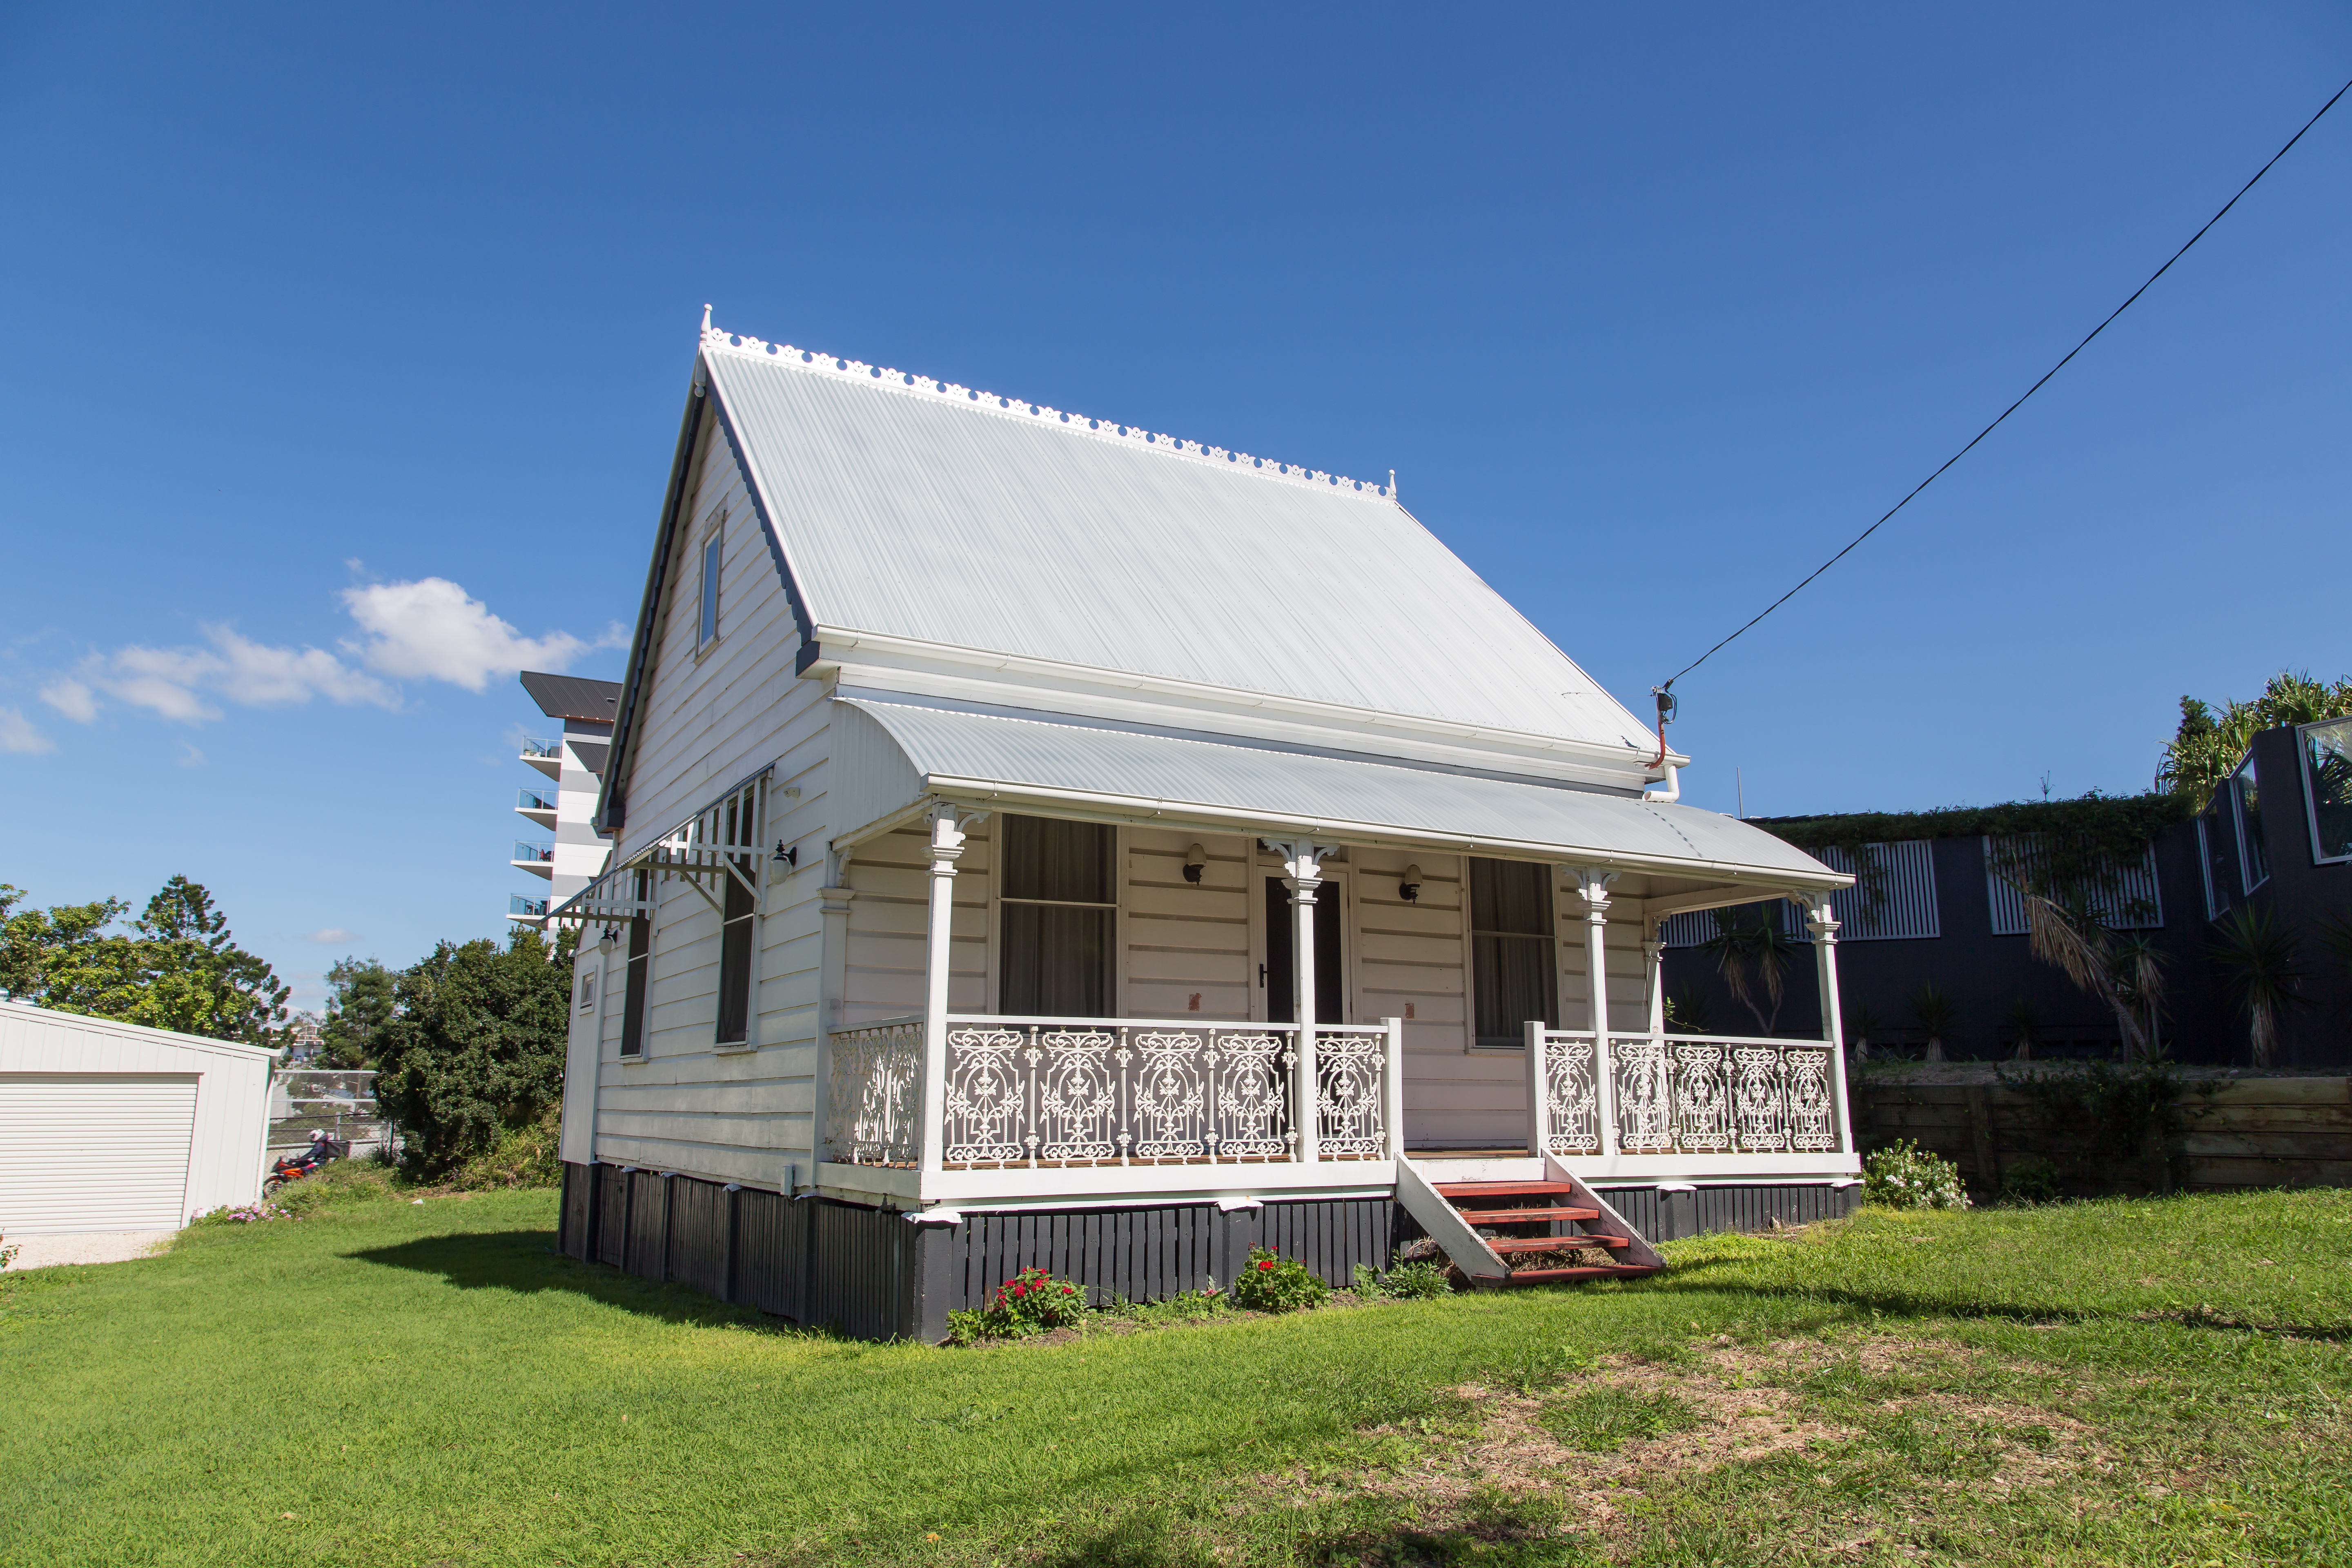 This is an image of the heritage place known as Alpha Cottage